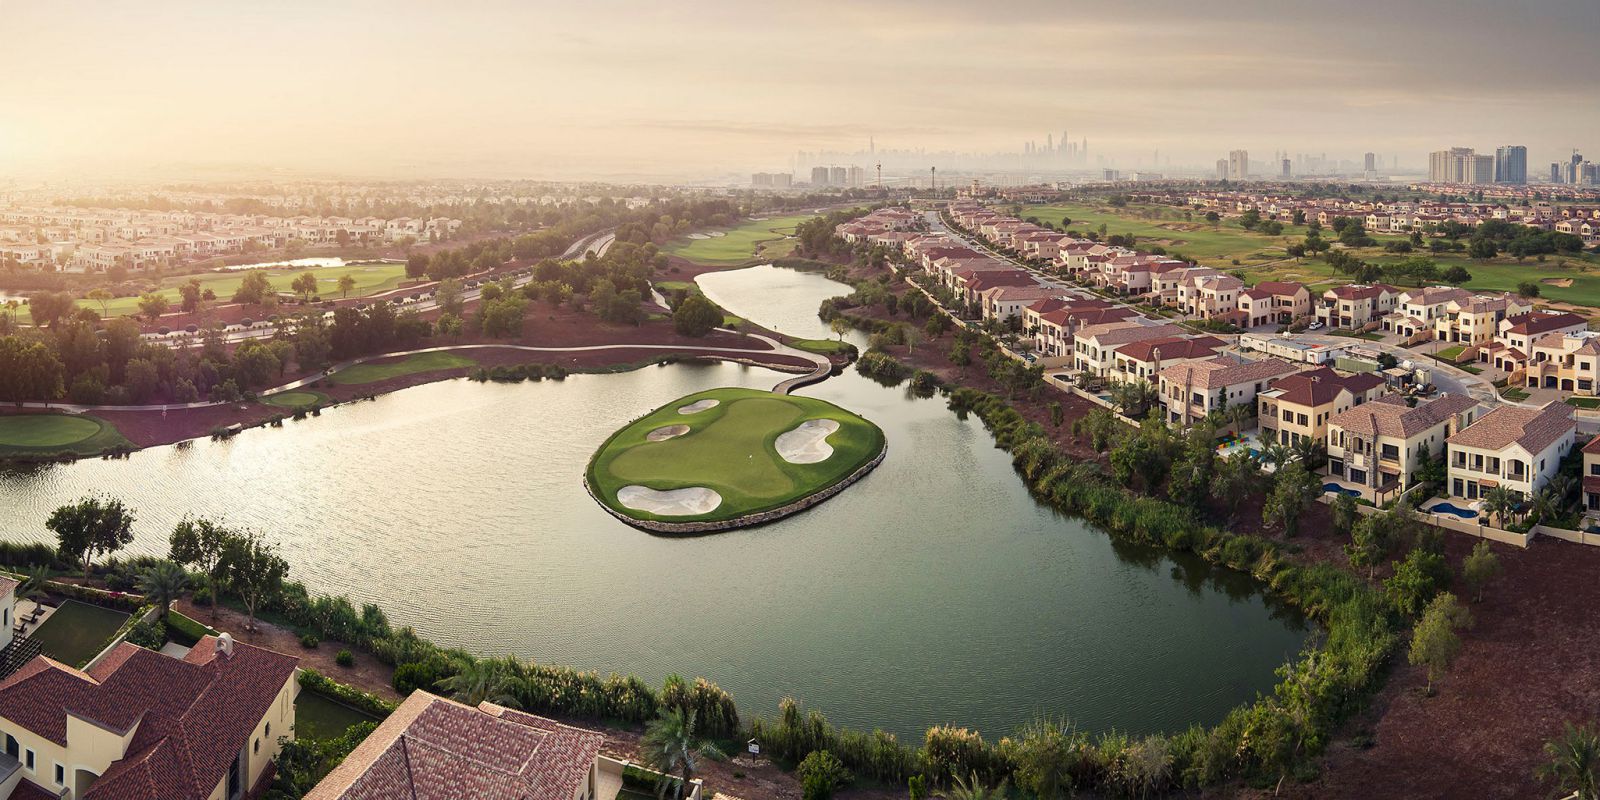 JUMEIRAH GOLF ESTATES RESPONDS TO MARKET DEMAND WITH EXCLUSIVE OFFER FOR ALANDALUS AND REDWOOD PARK AT DPWTC